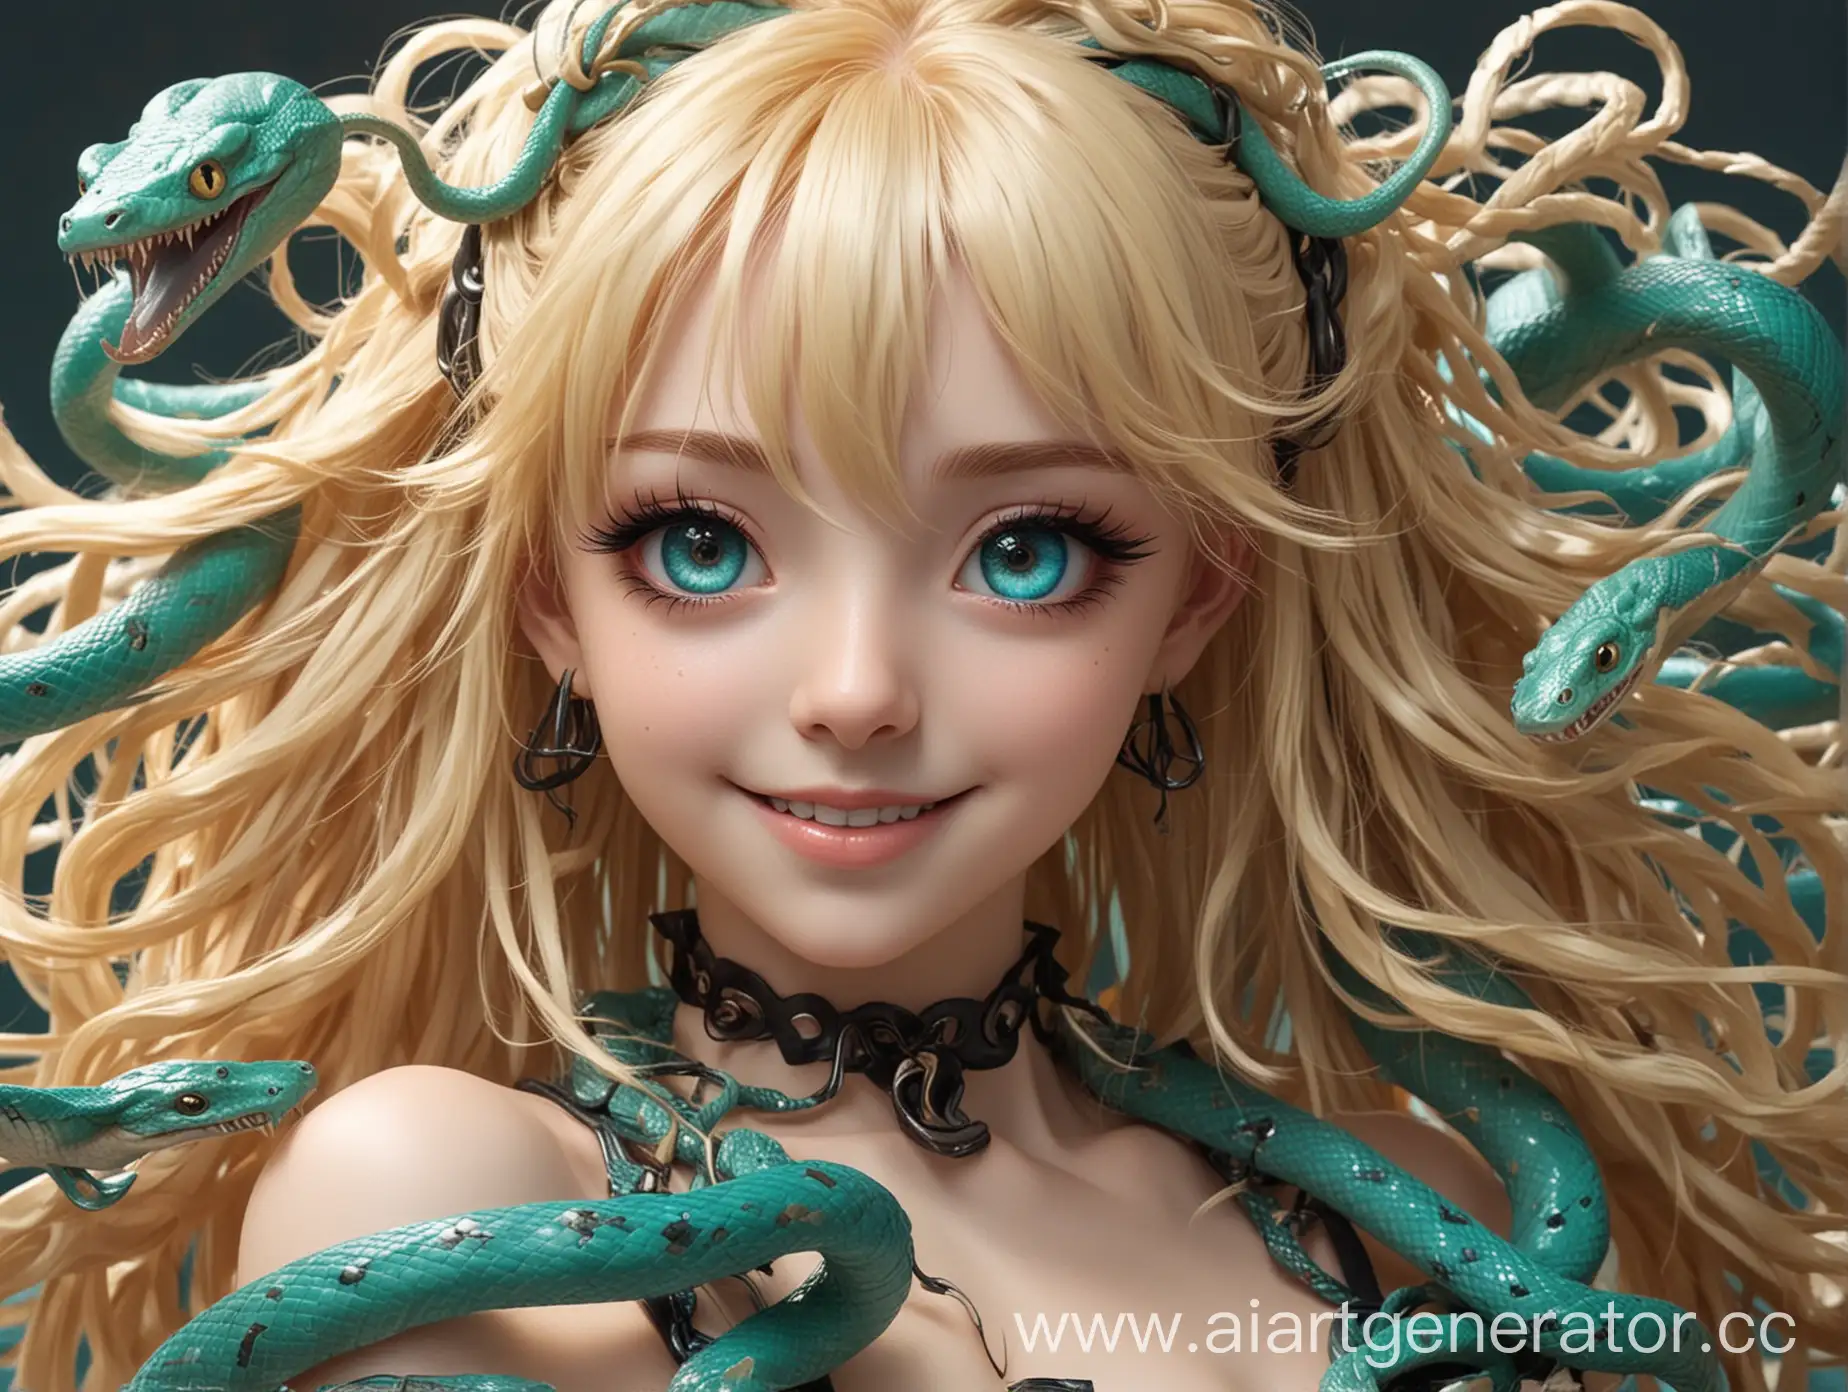 Blonde-Anime-Loli-with-Turquoise-Highlights-and-Serpent-Hair